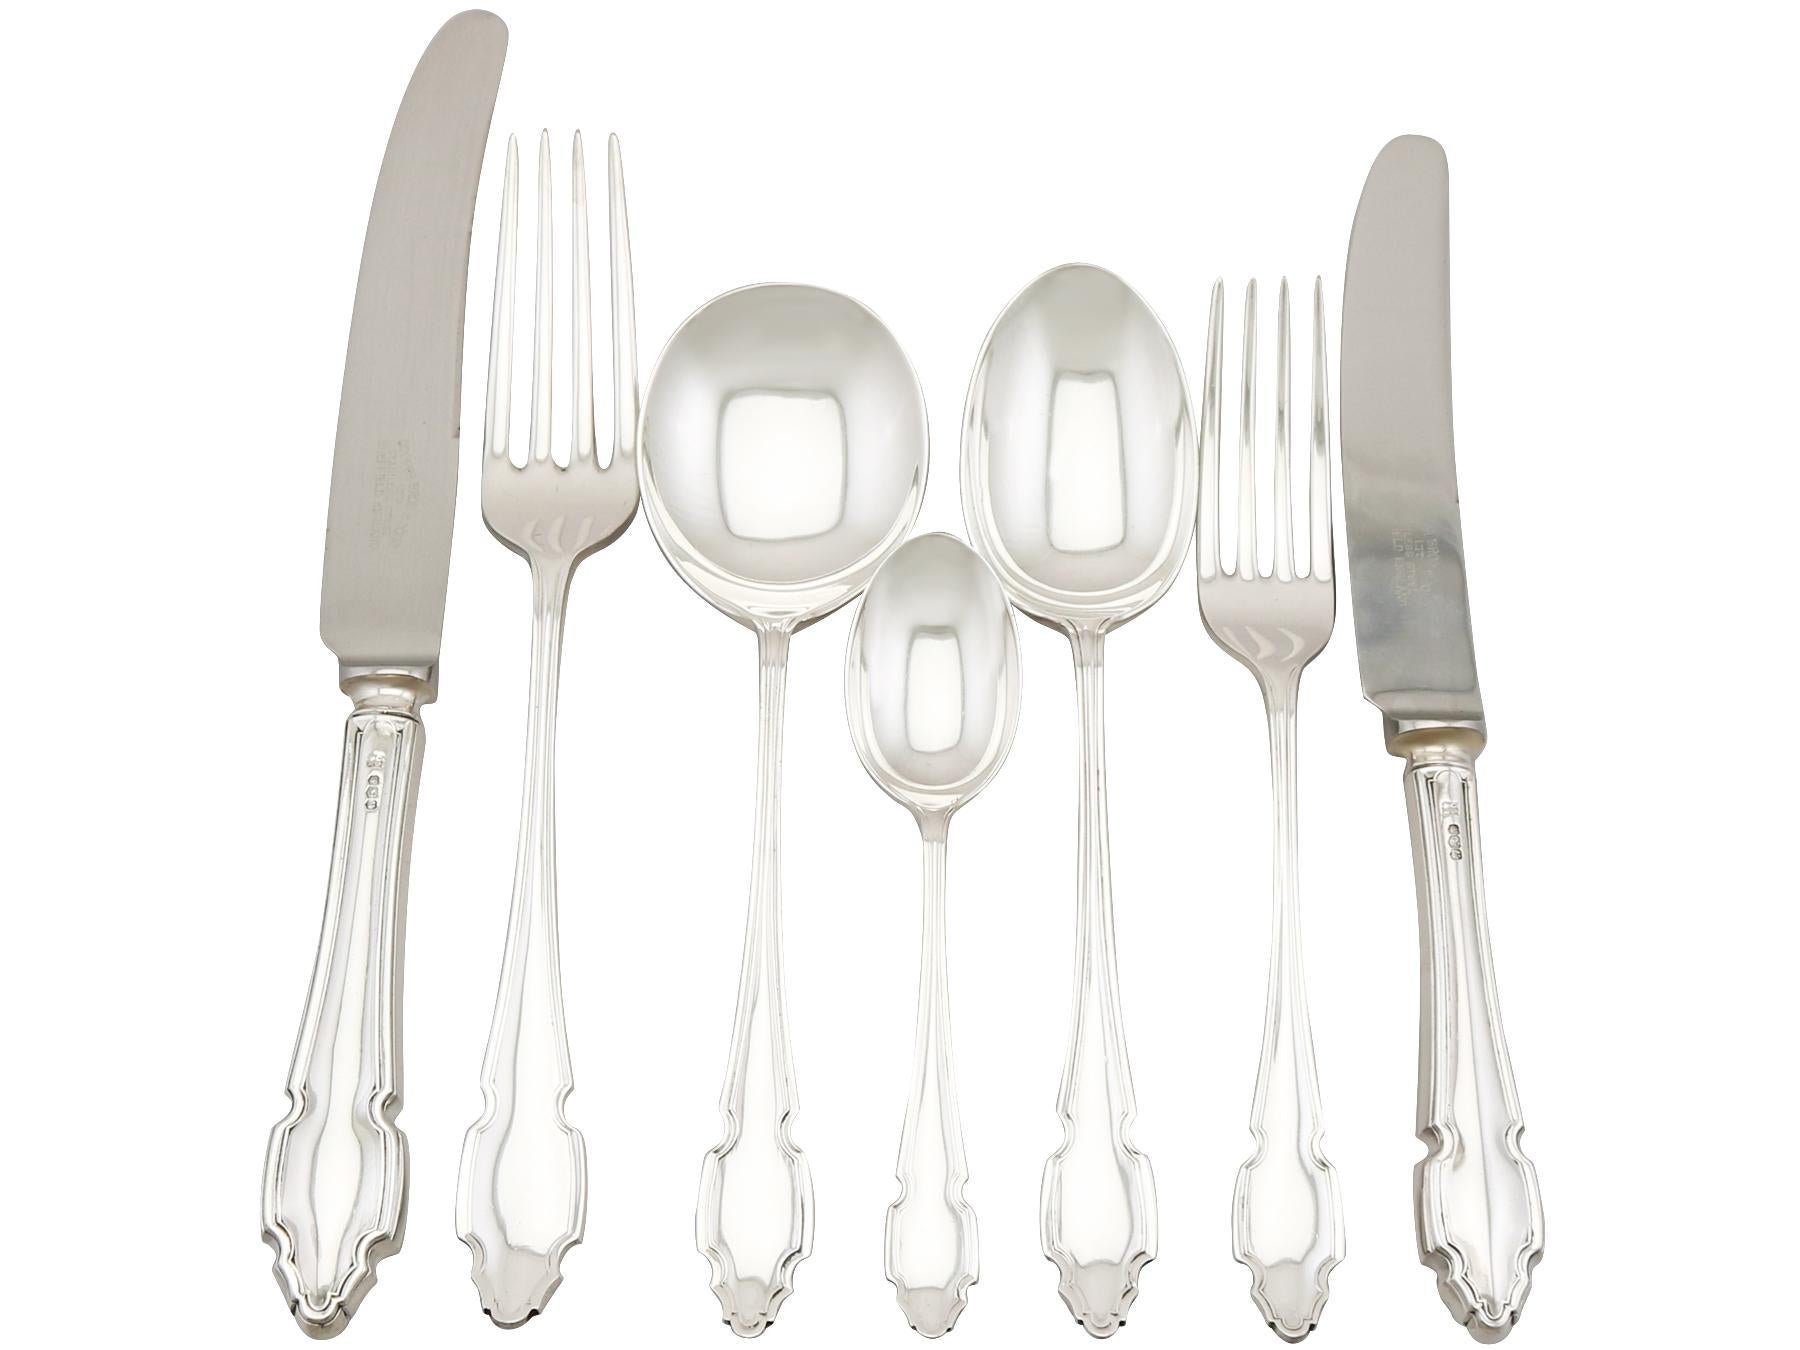 An exceptional, fine and impressive vintage Elizabeth II English sterling silver straight Dubarry I pattern canteen of cutlery for six persons made by Cooper Brothers & Sons Ltd; an addition to our antique flatware sets.

The pieces of this